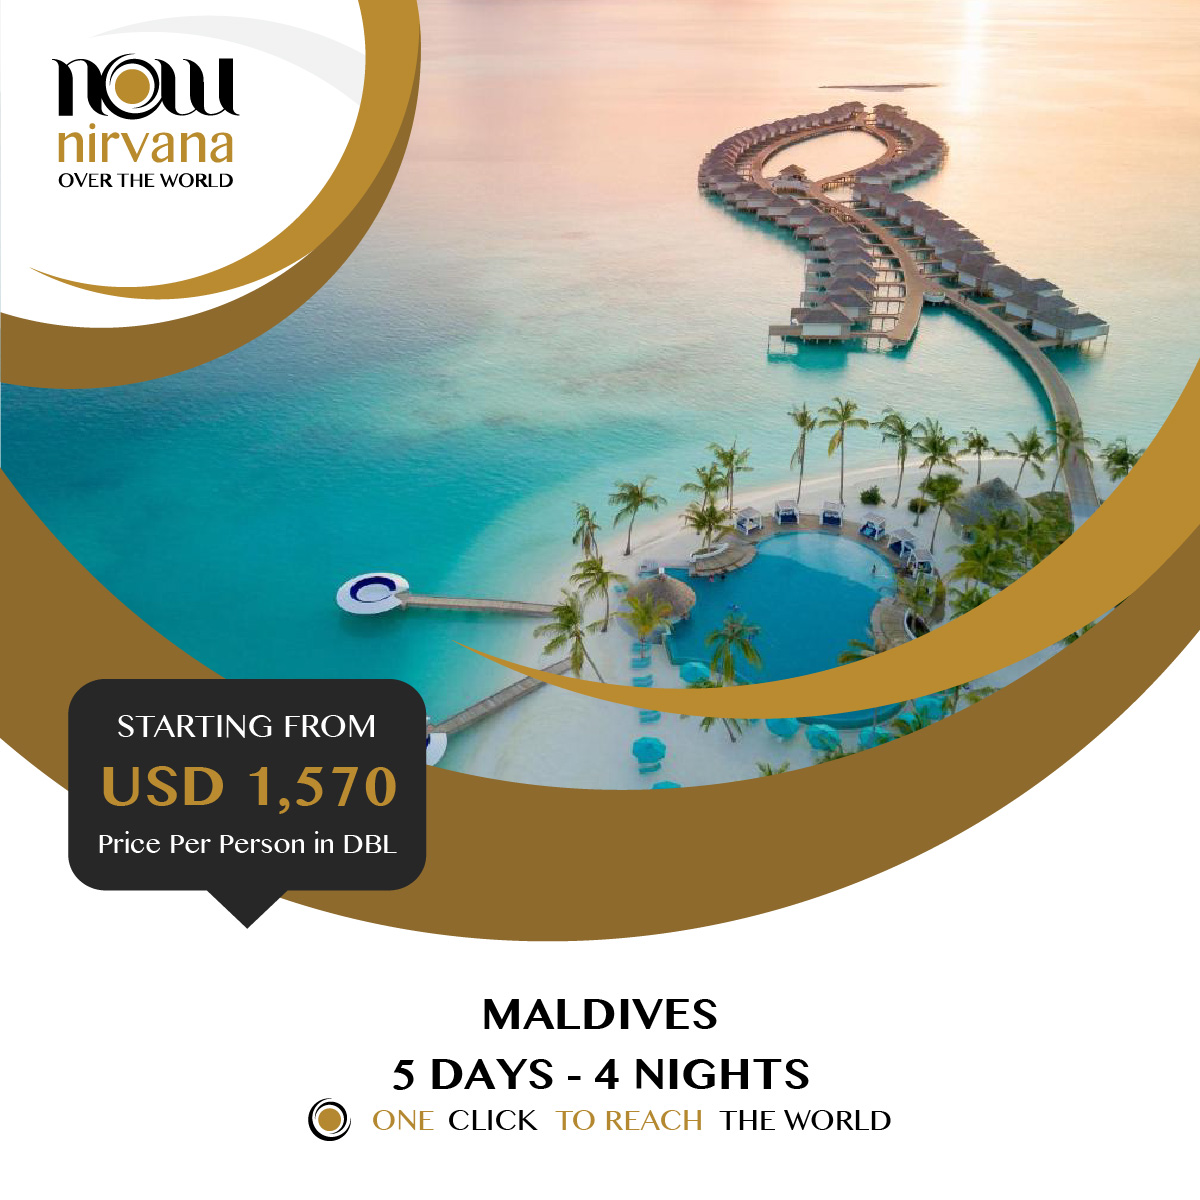 Paradise Found! Crystal-clear waters, pristine beaches, and endless sunshine. 

The Maldives is a dream come true!

Book now.

#NOW #Nirvana #NirvanaOvertheWorld #Maldives #Travel #Paradise #PristineBeaches #AdreamComeTrue